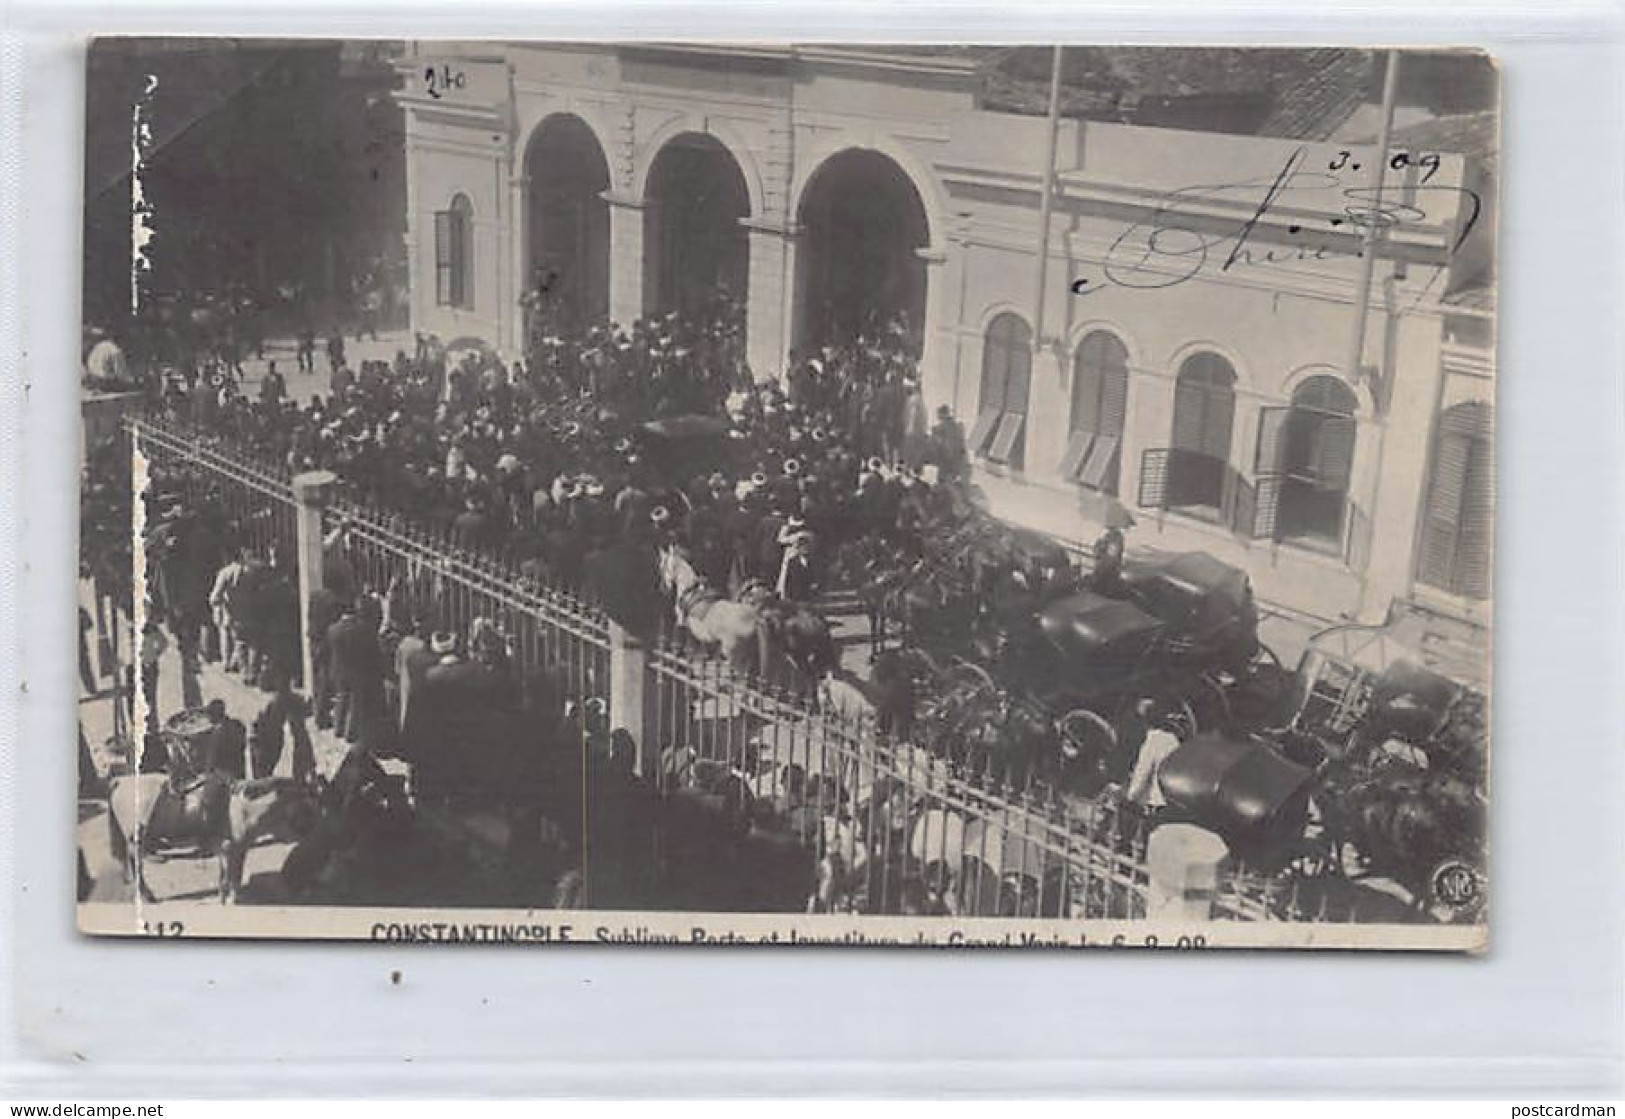 Turkey - ISTANBUL - Sublime Porte And Investiture Of The Grand Vizier On August 6, 1908 - Publ. N.P.G. 112 - Turquie